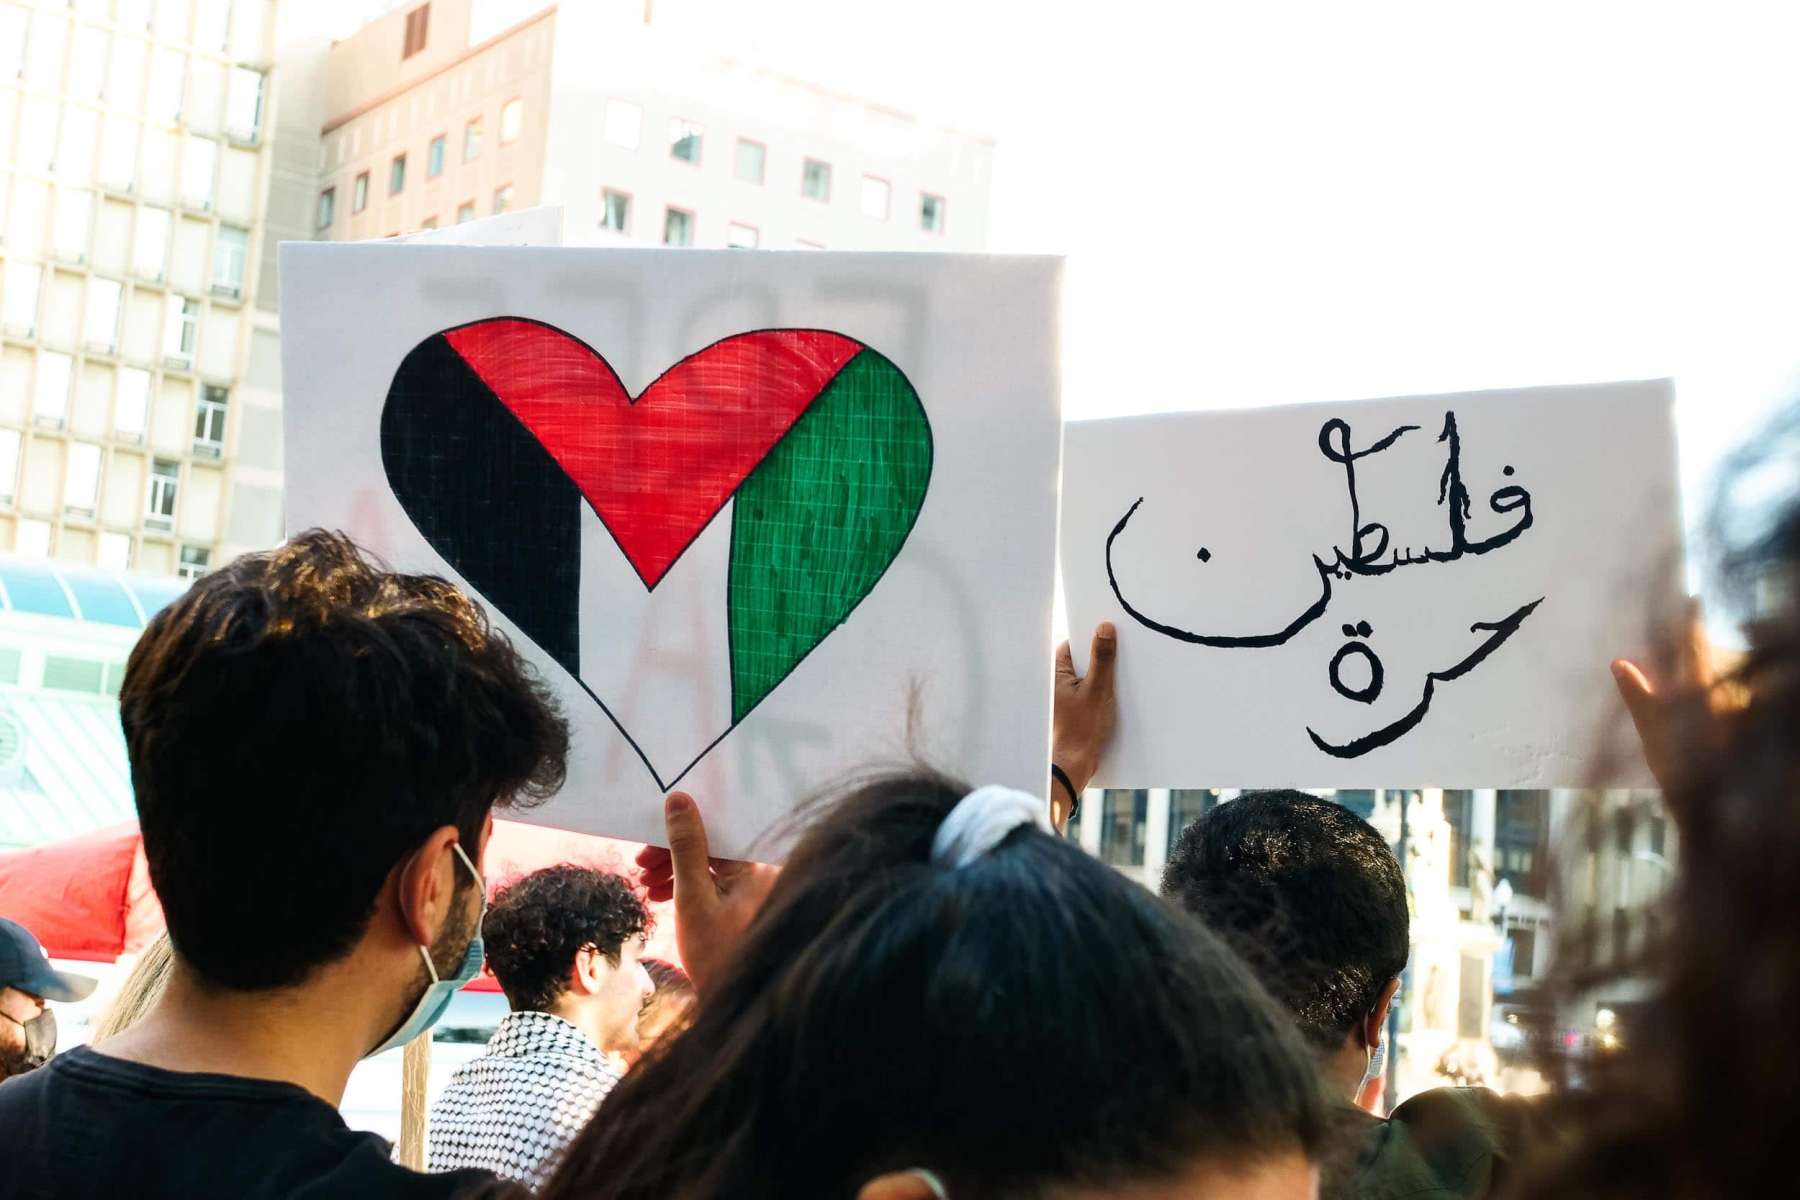 Selene Means: Photos from the Free Palestine rally in Providence